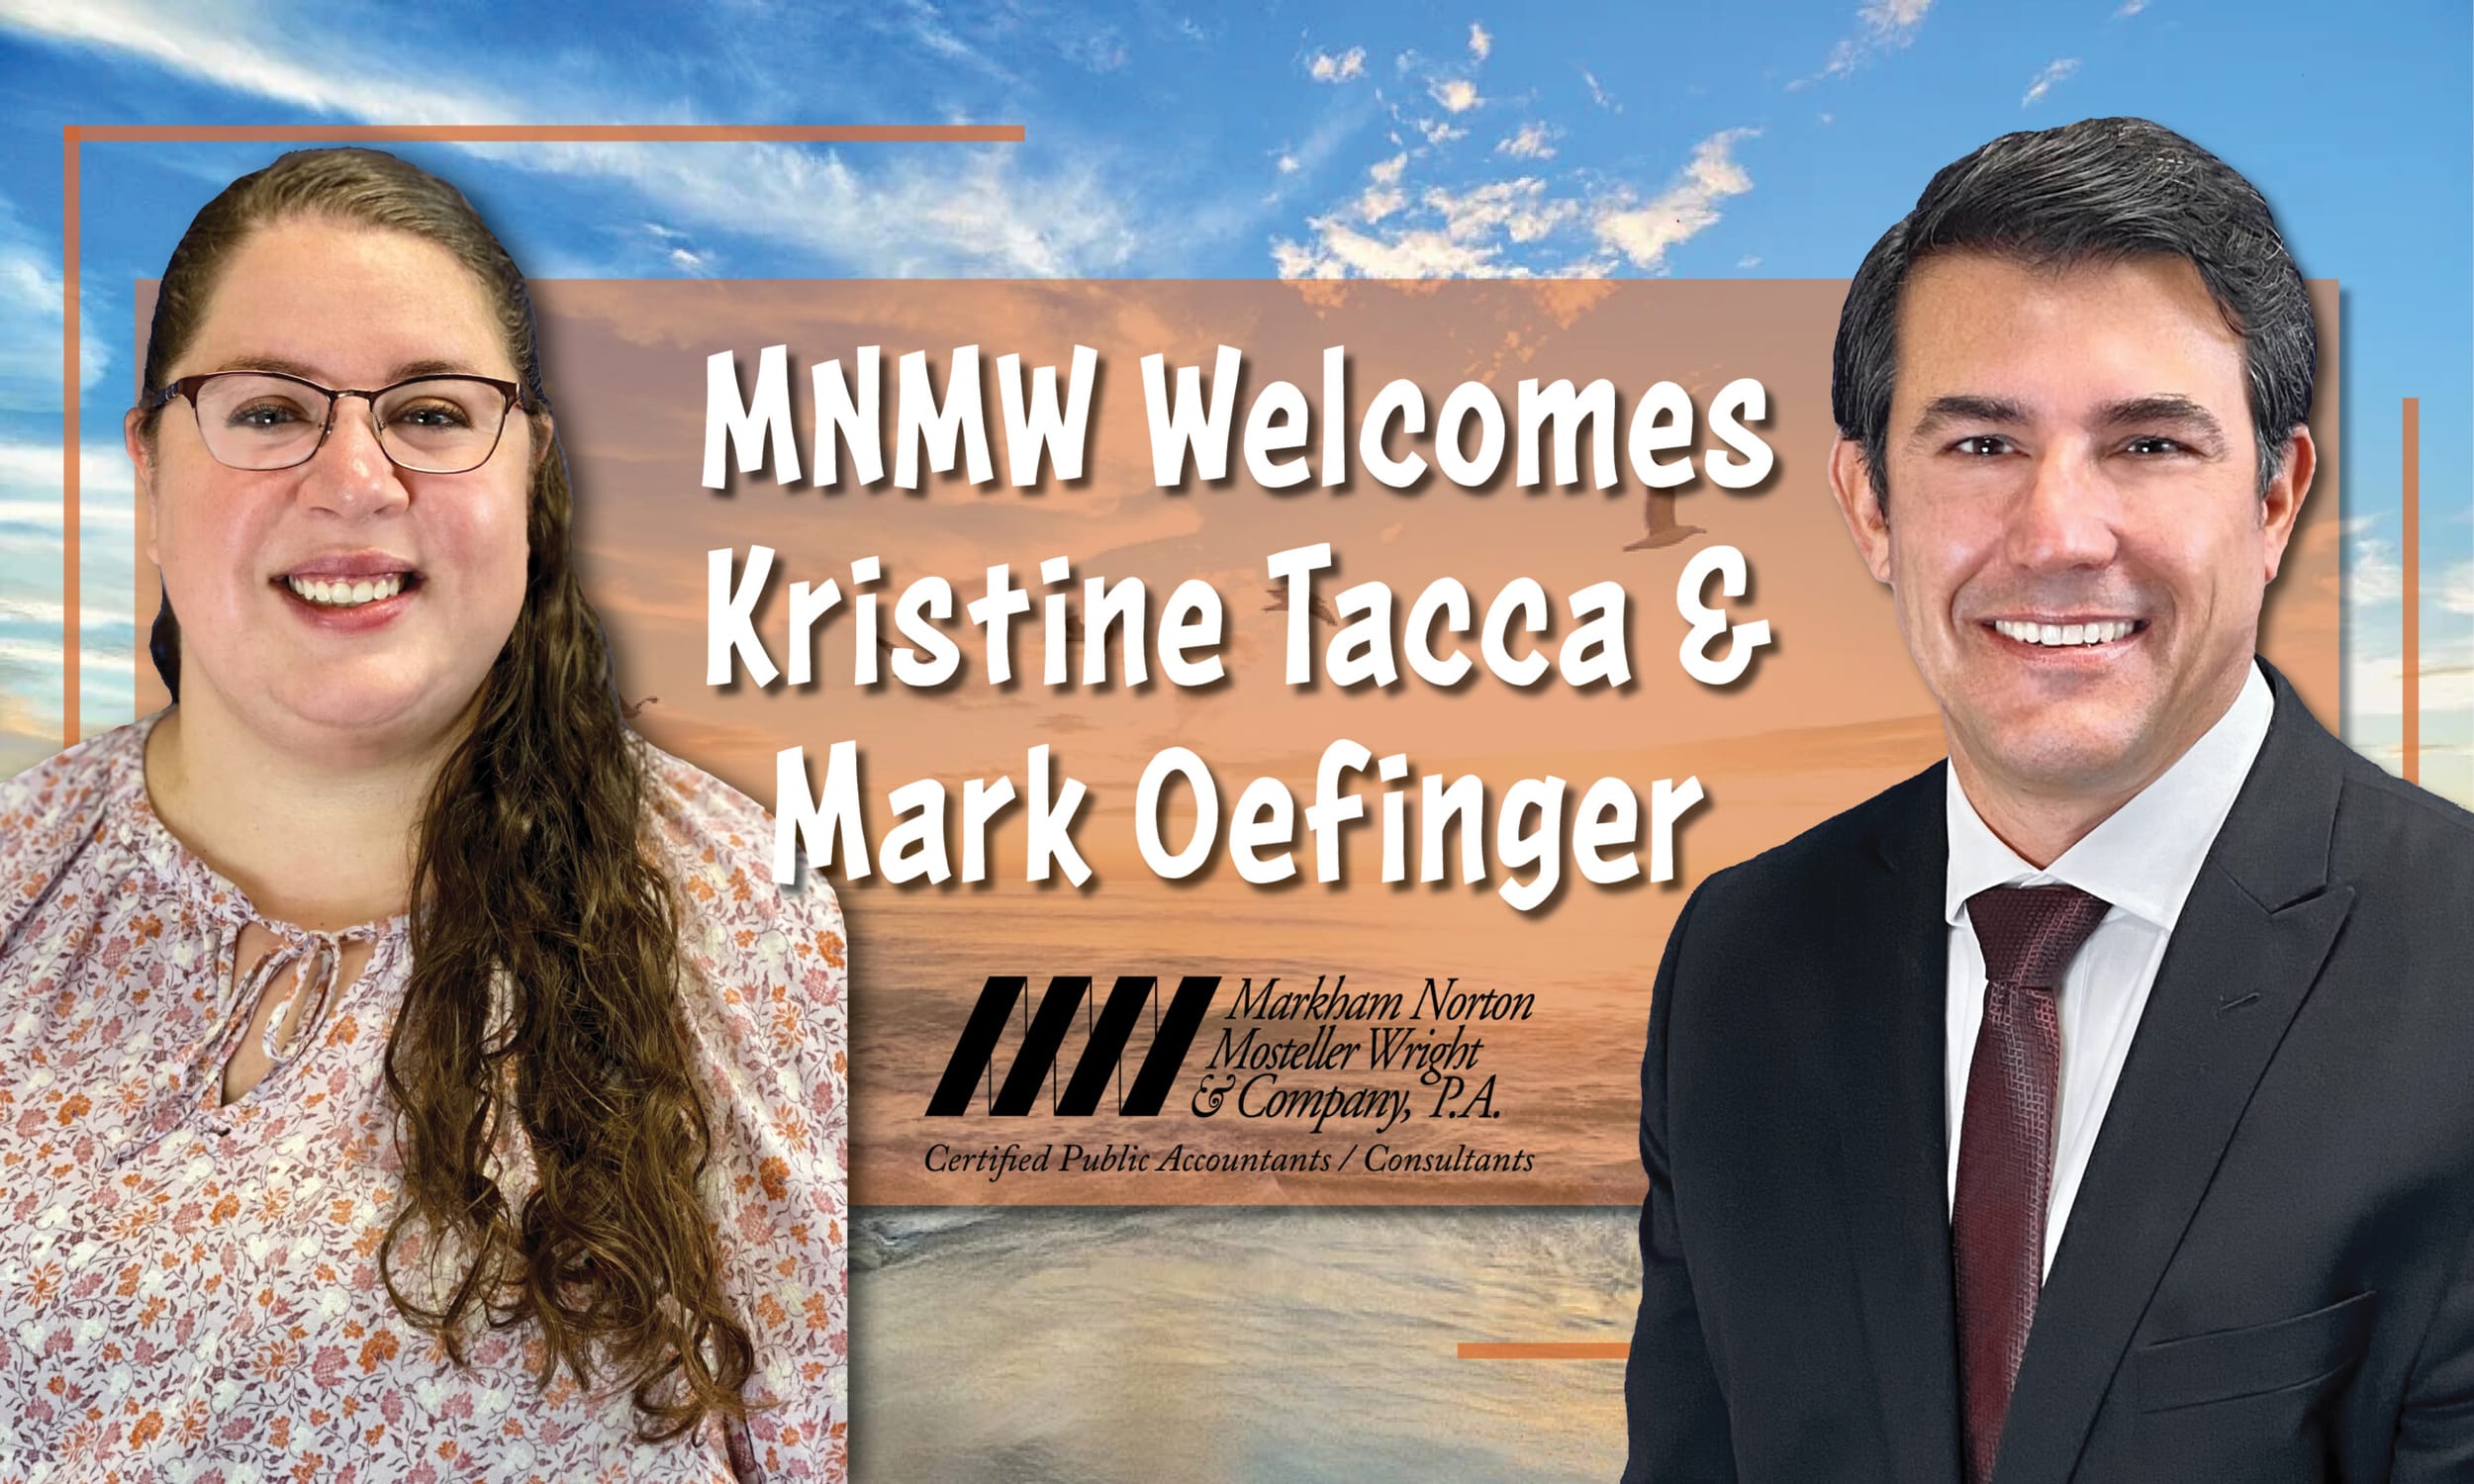 MNMW Welcomes Kristine and Mark